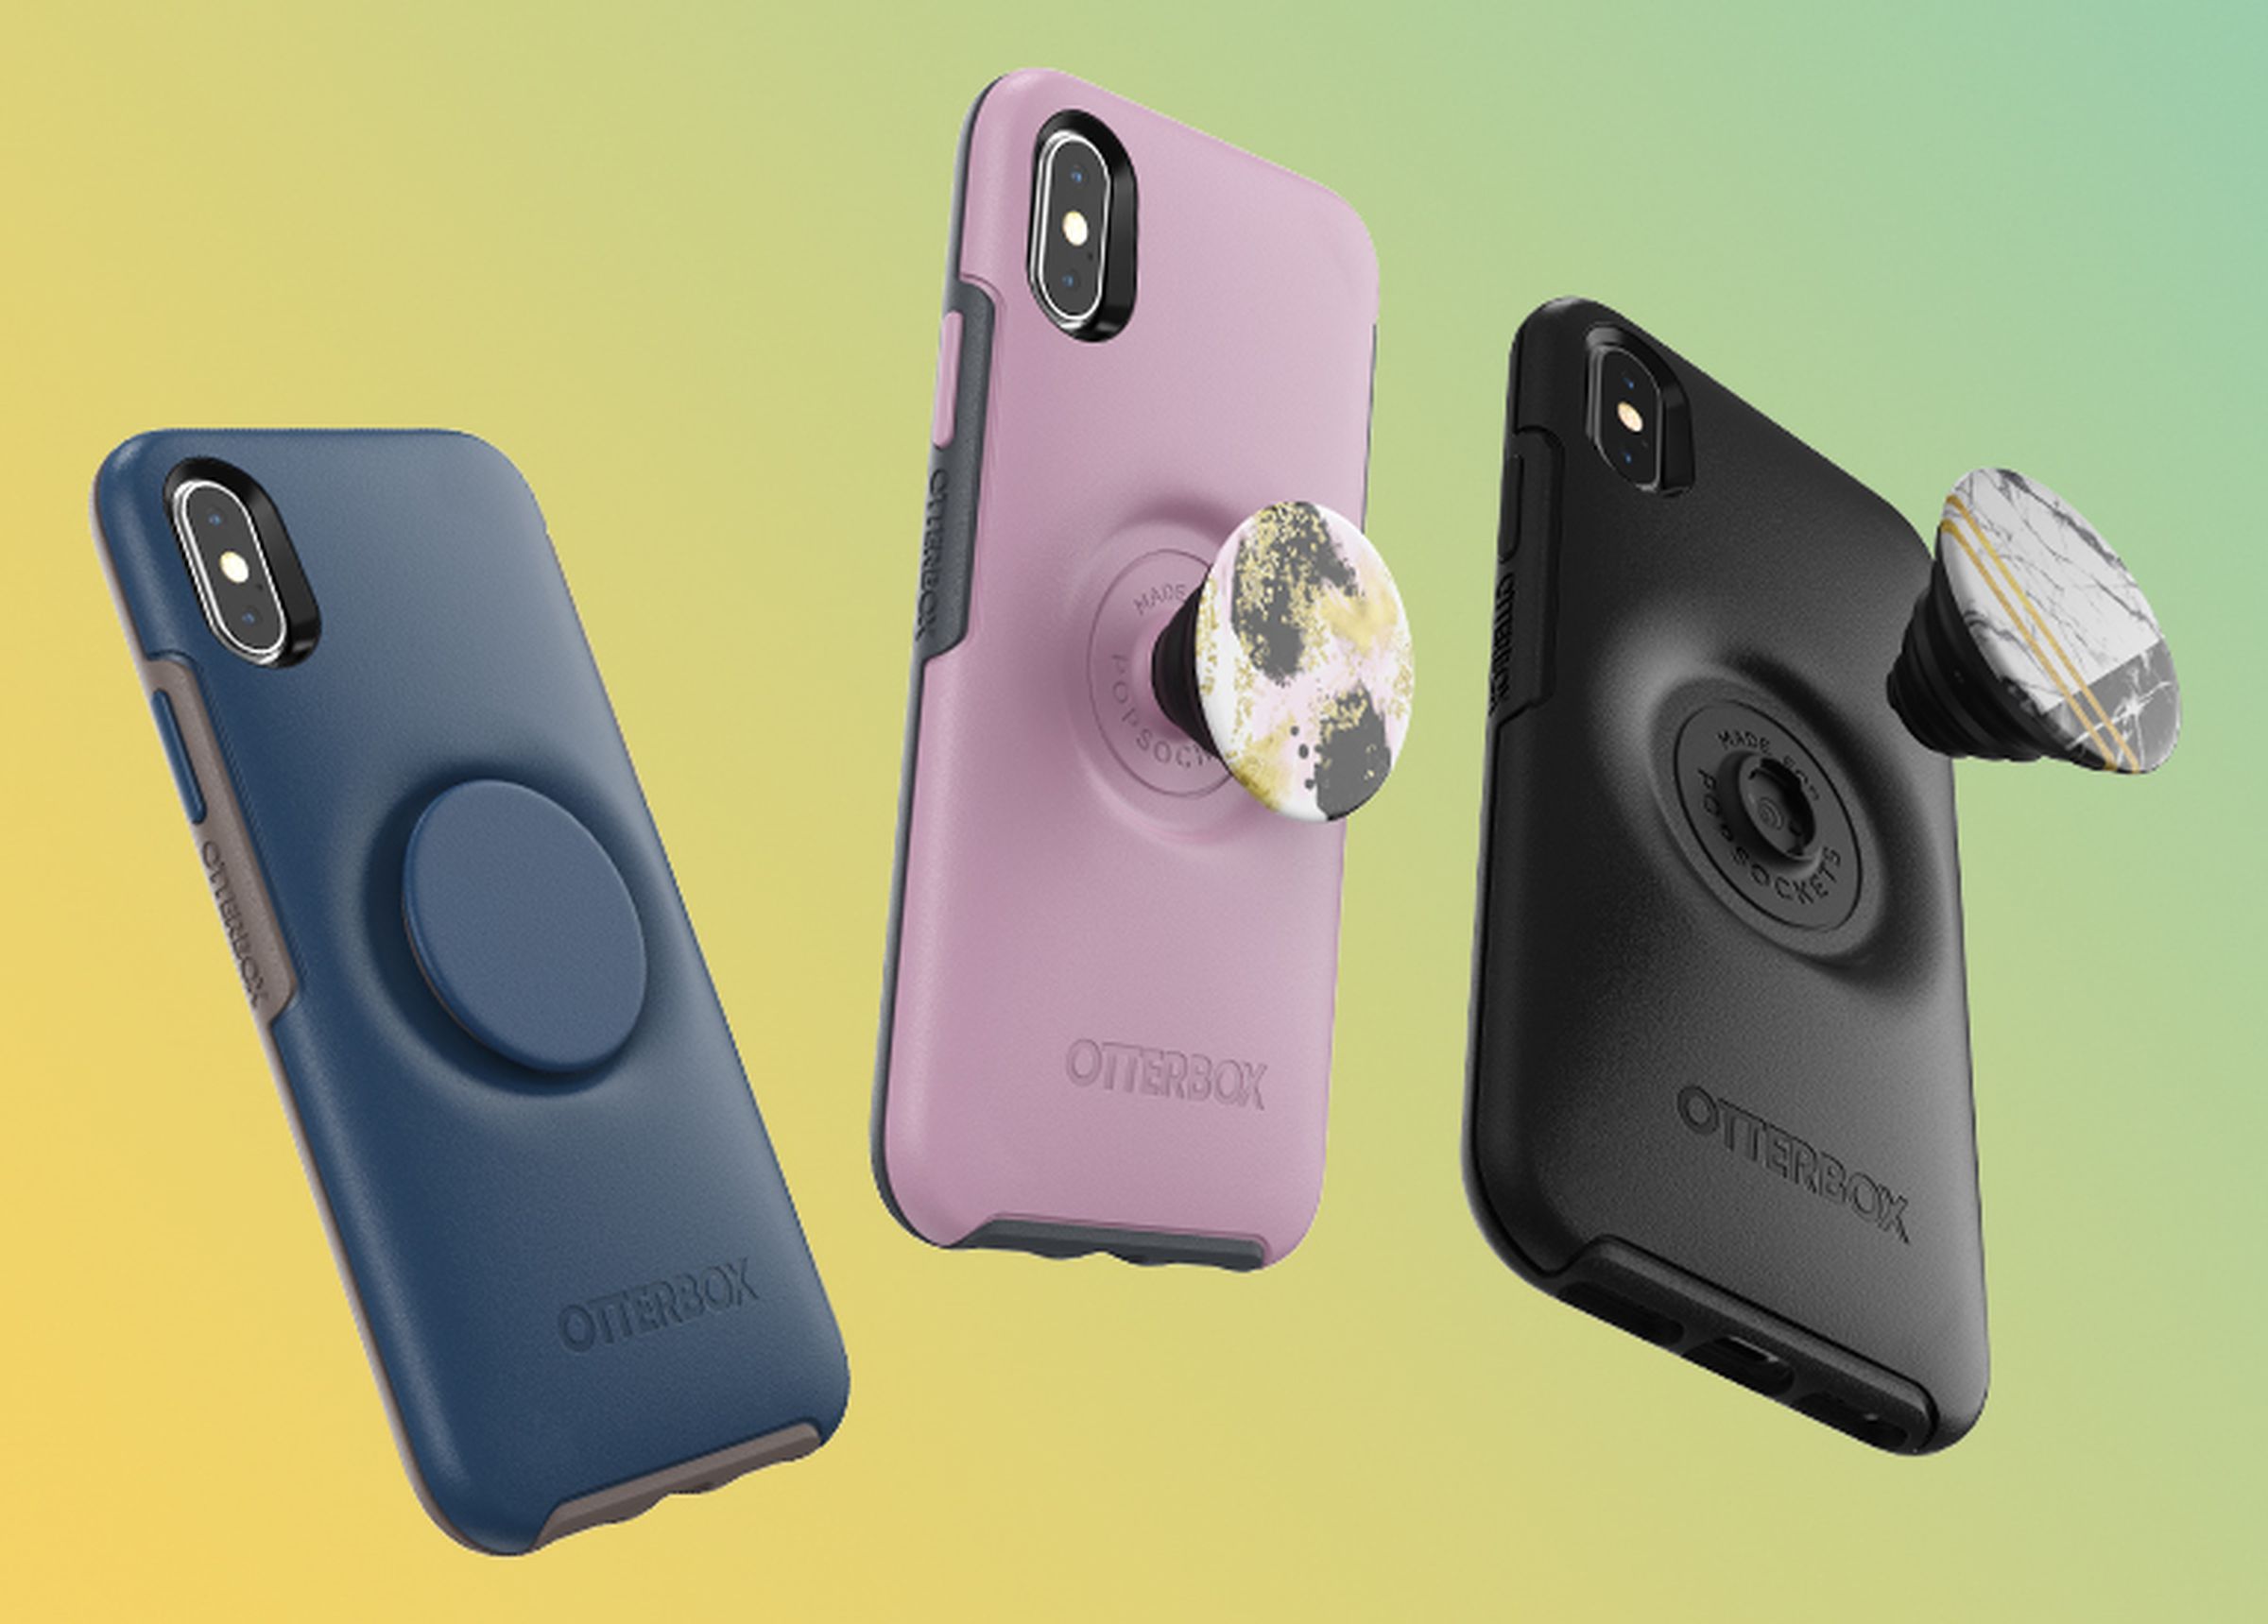 Otterbox tried building swappable PopSockets into a case — a halfway step.